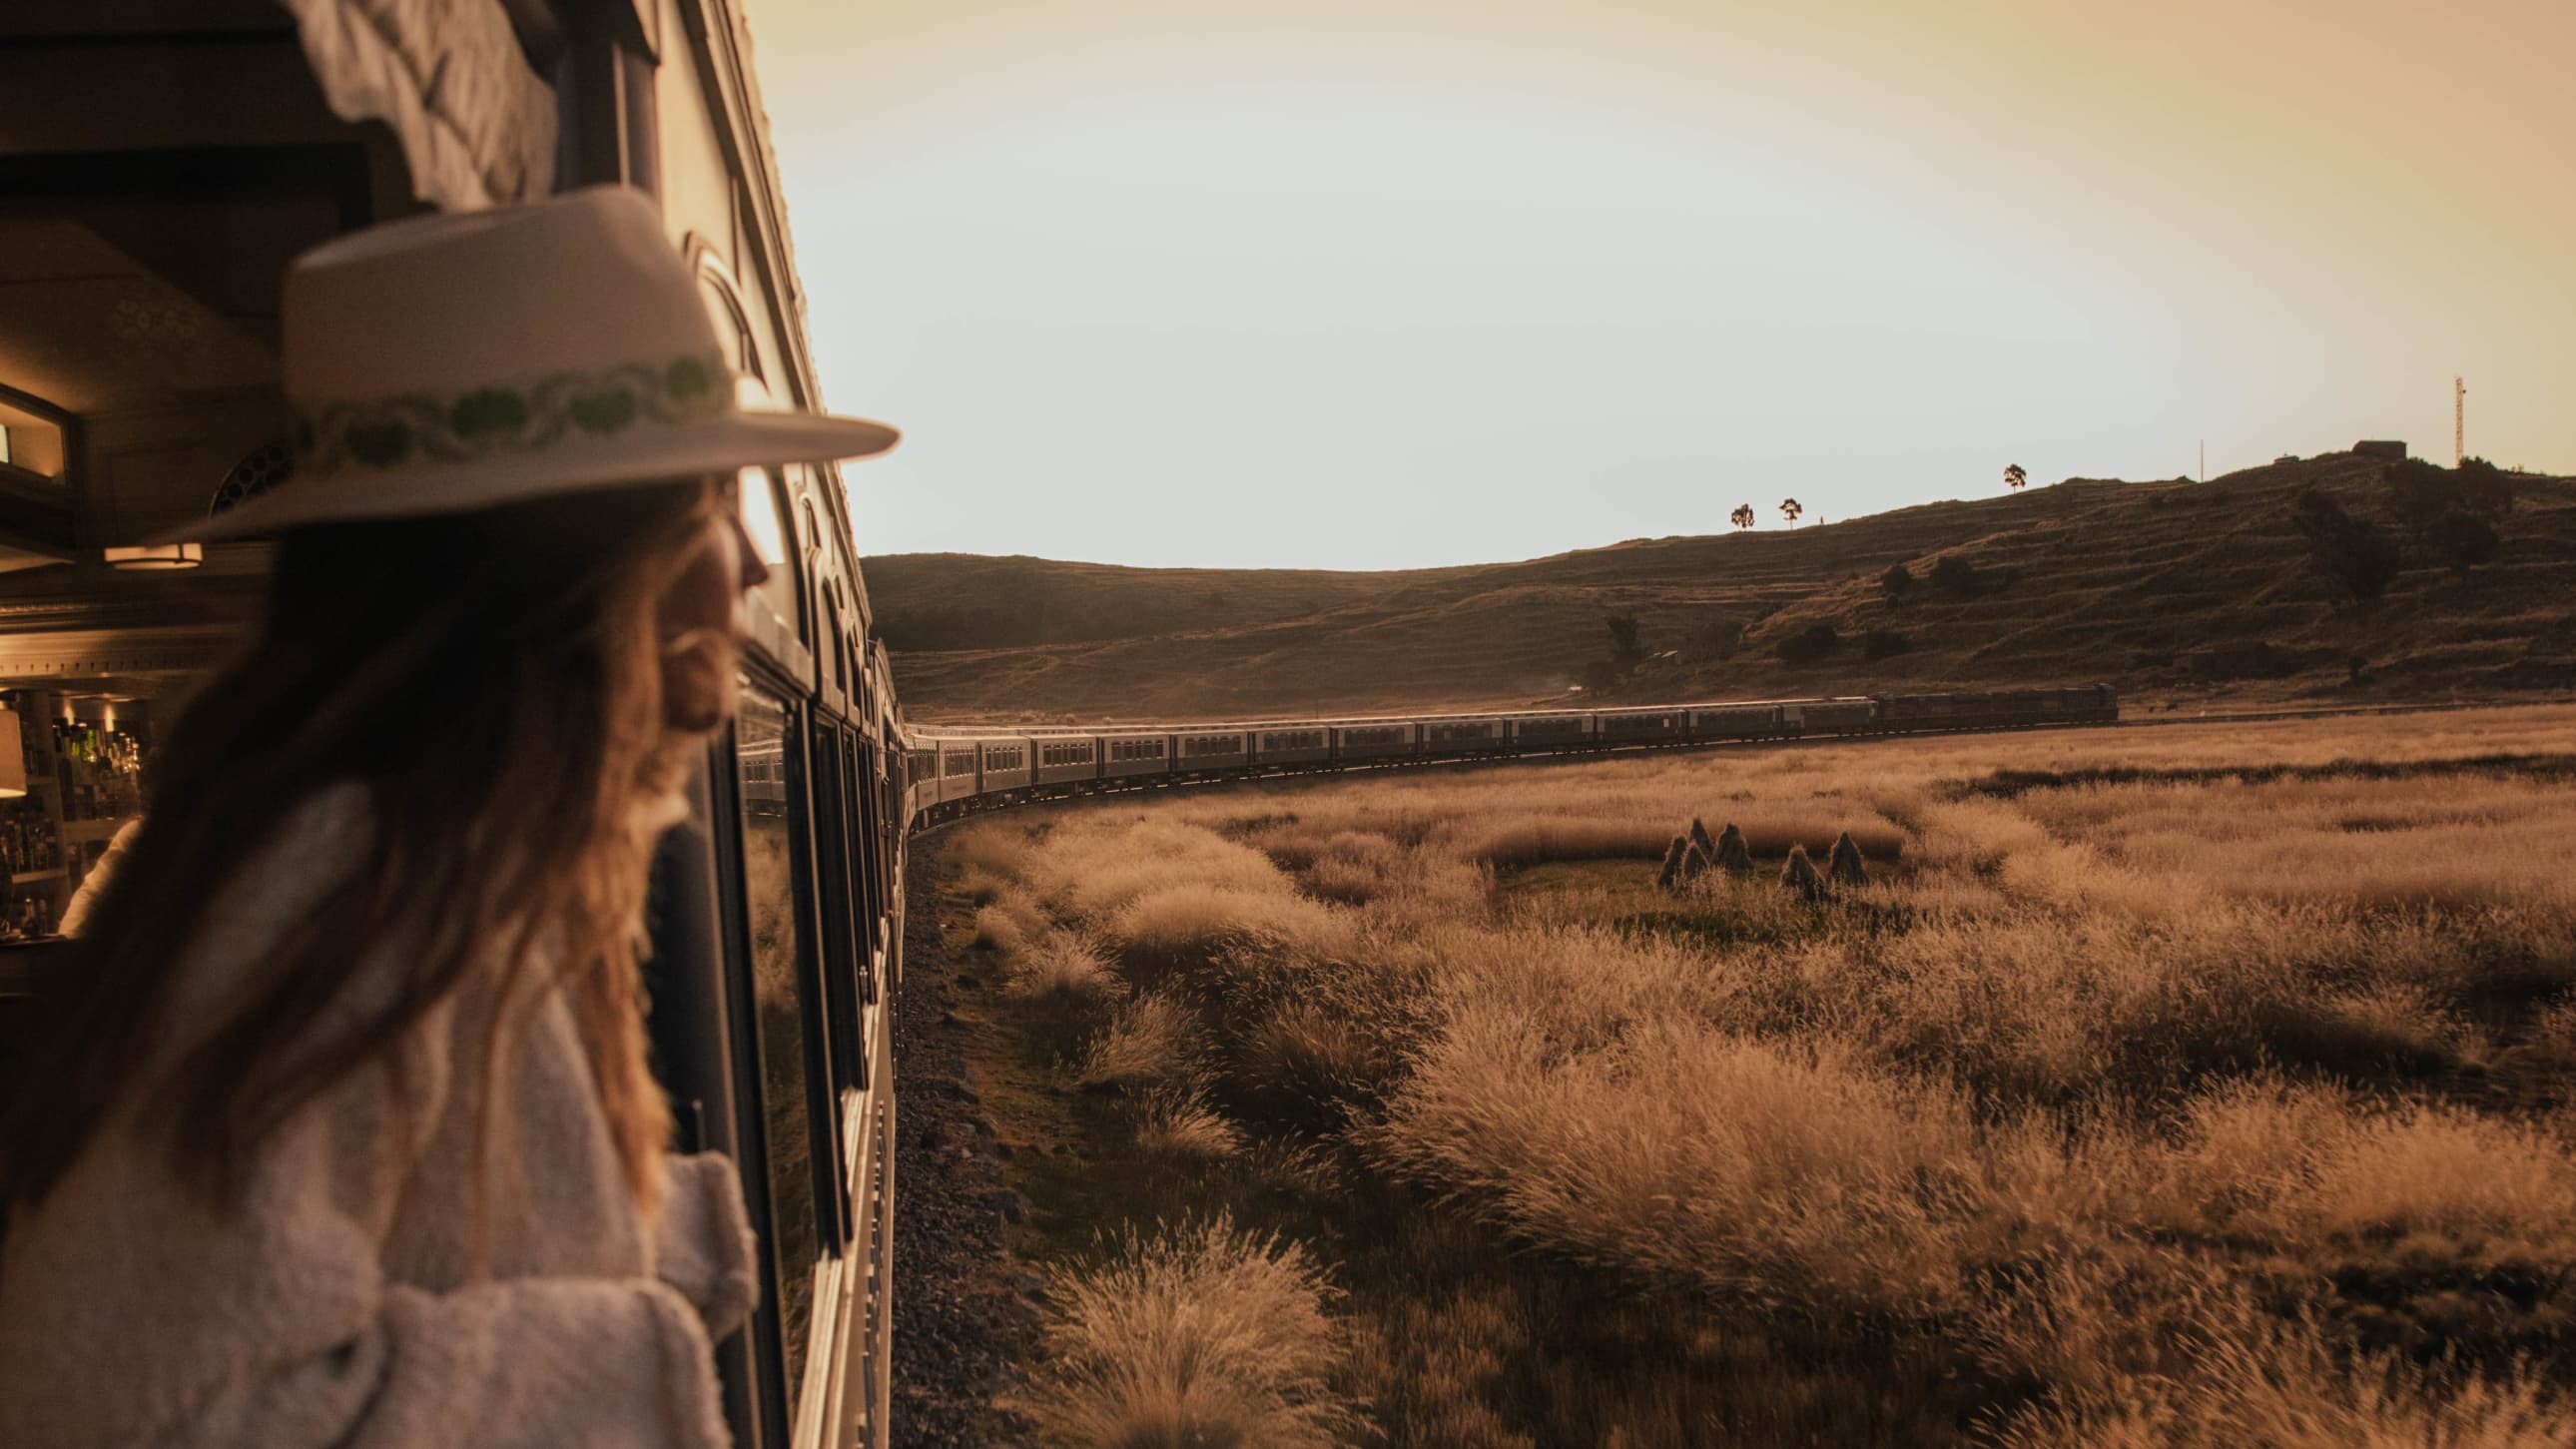 Belmond South America  Luxury Hotels and Iconic Trains